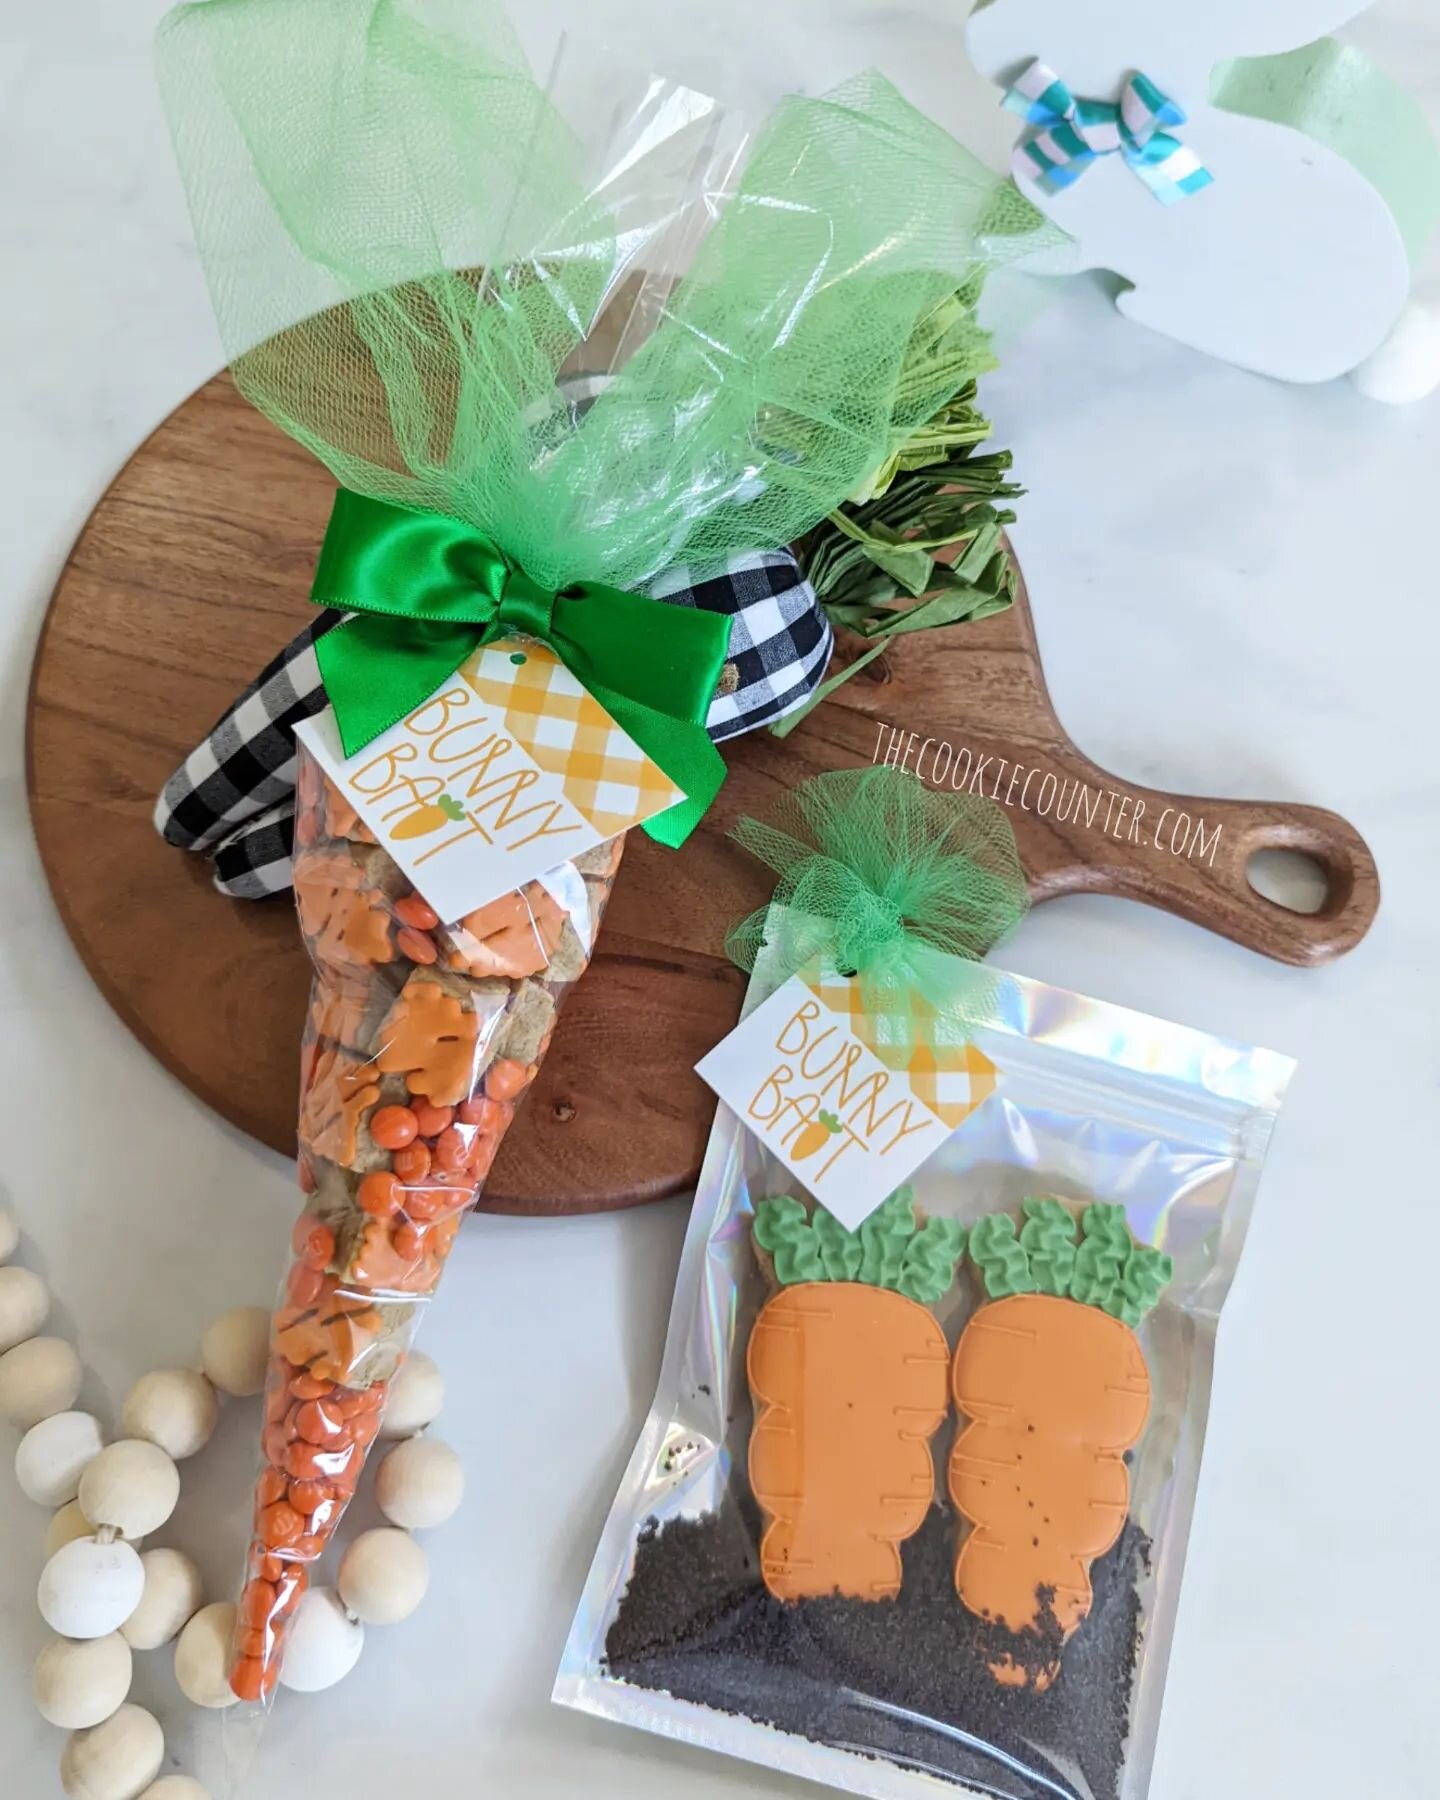 Easter pre-ordering closes tomorrow! 🐰🌷 Even if you're planning to come to the pop-up, I recommend to pre-order. If you want any personalized cookies for #easterbasketstuffers then you must pre-order those items